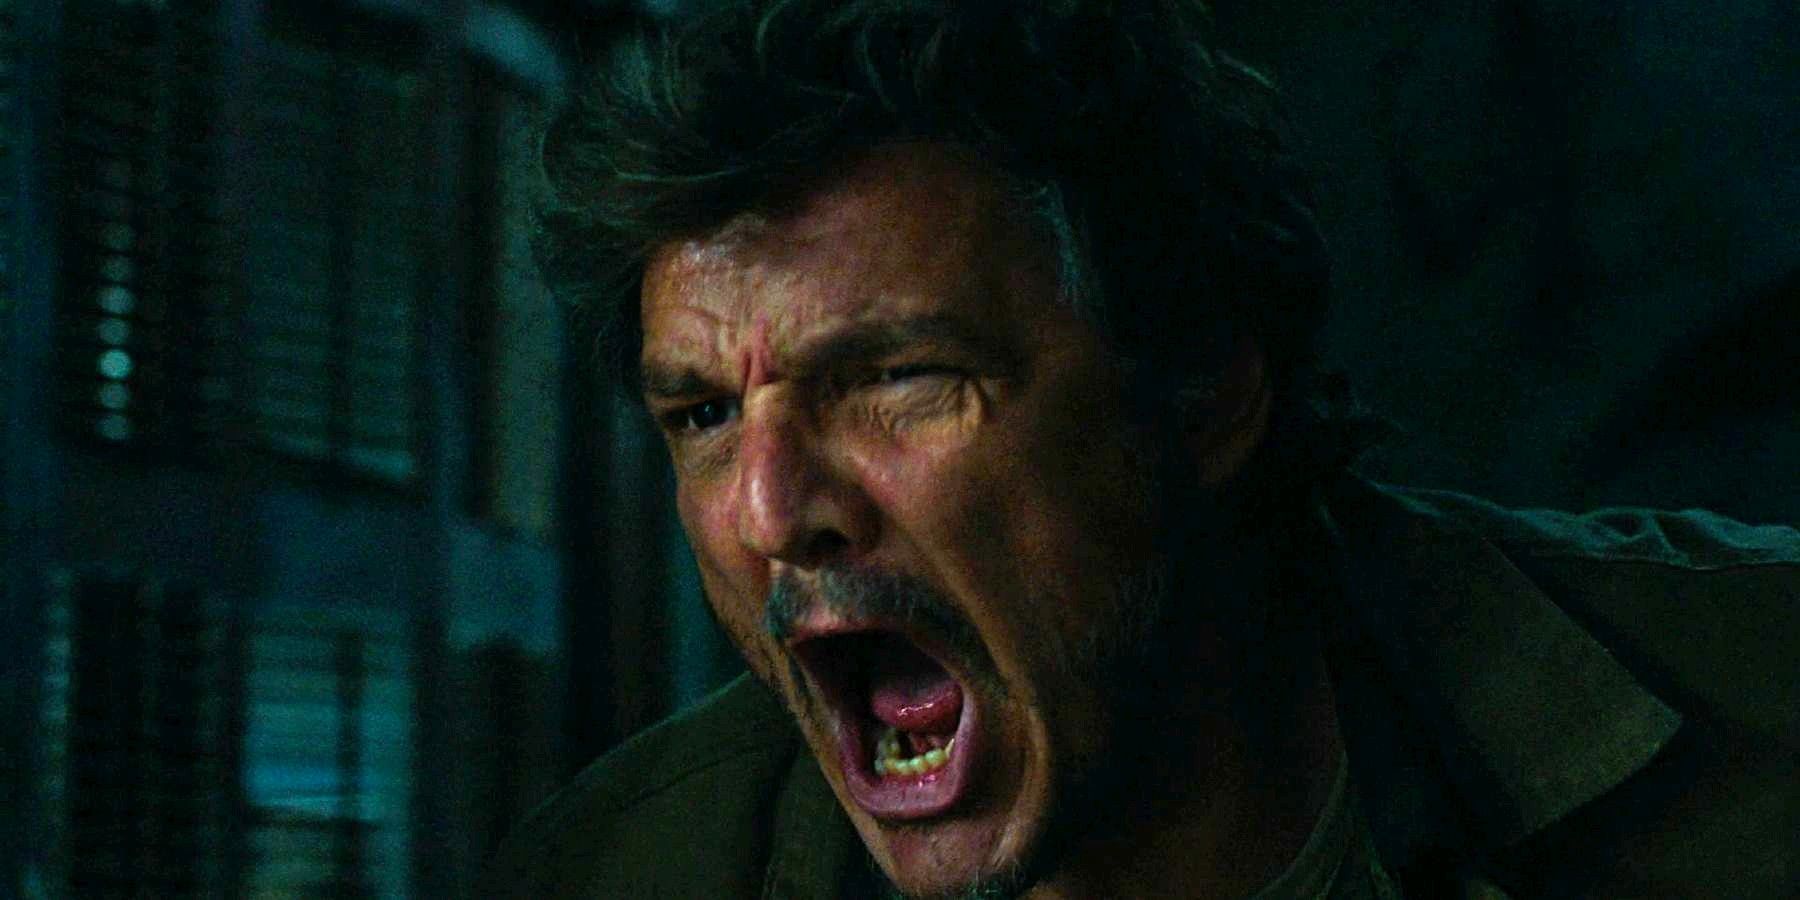 Pedro Pascal screaming as Joel in The Last of Us episode 5